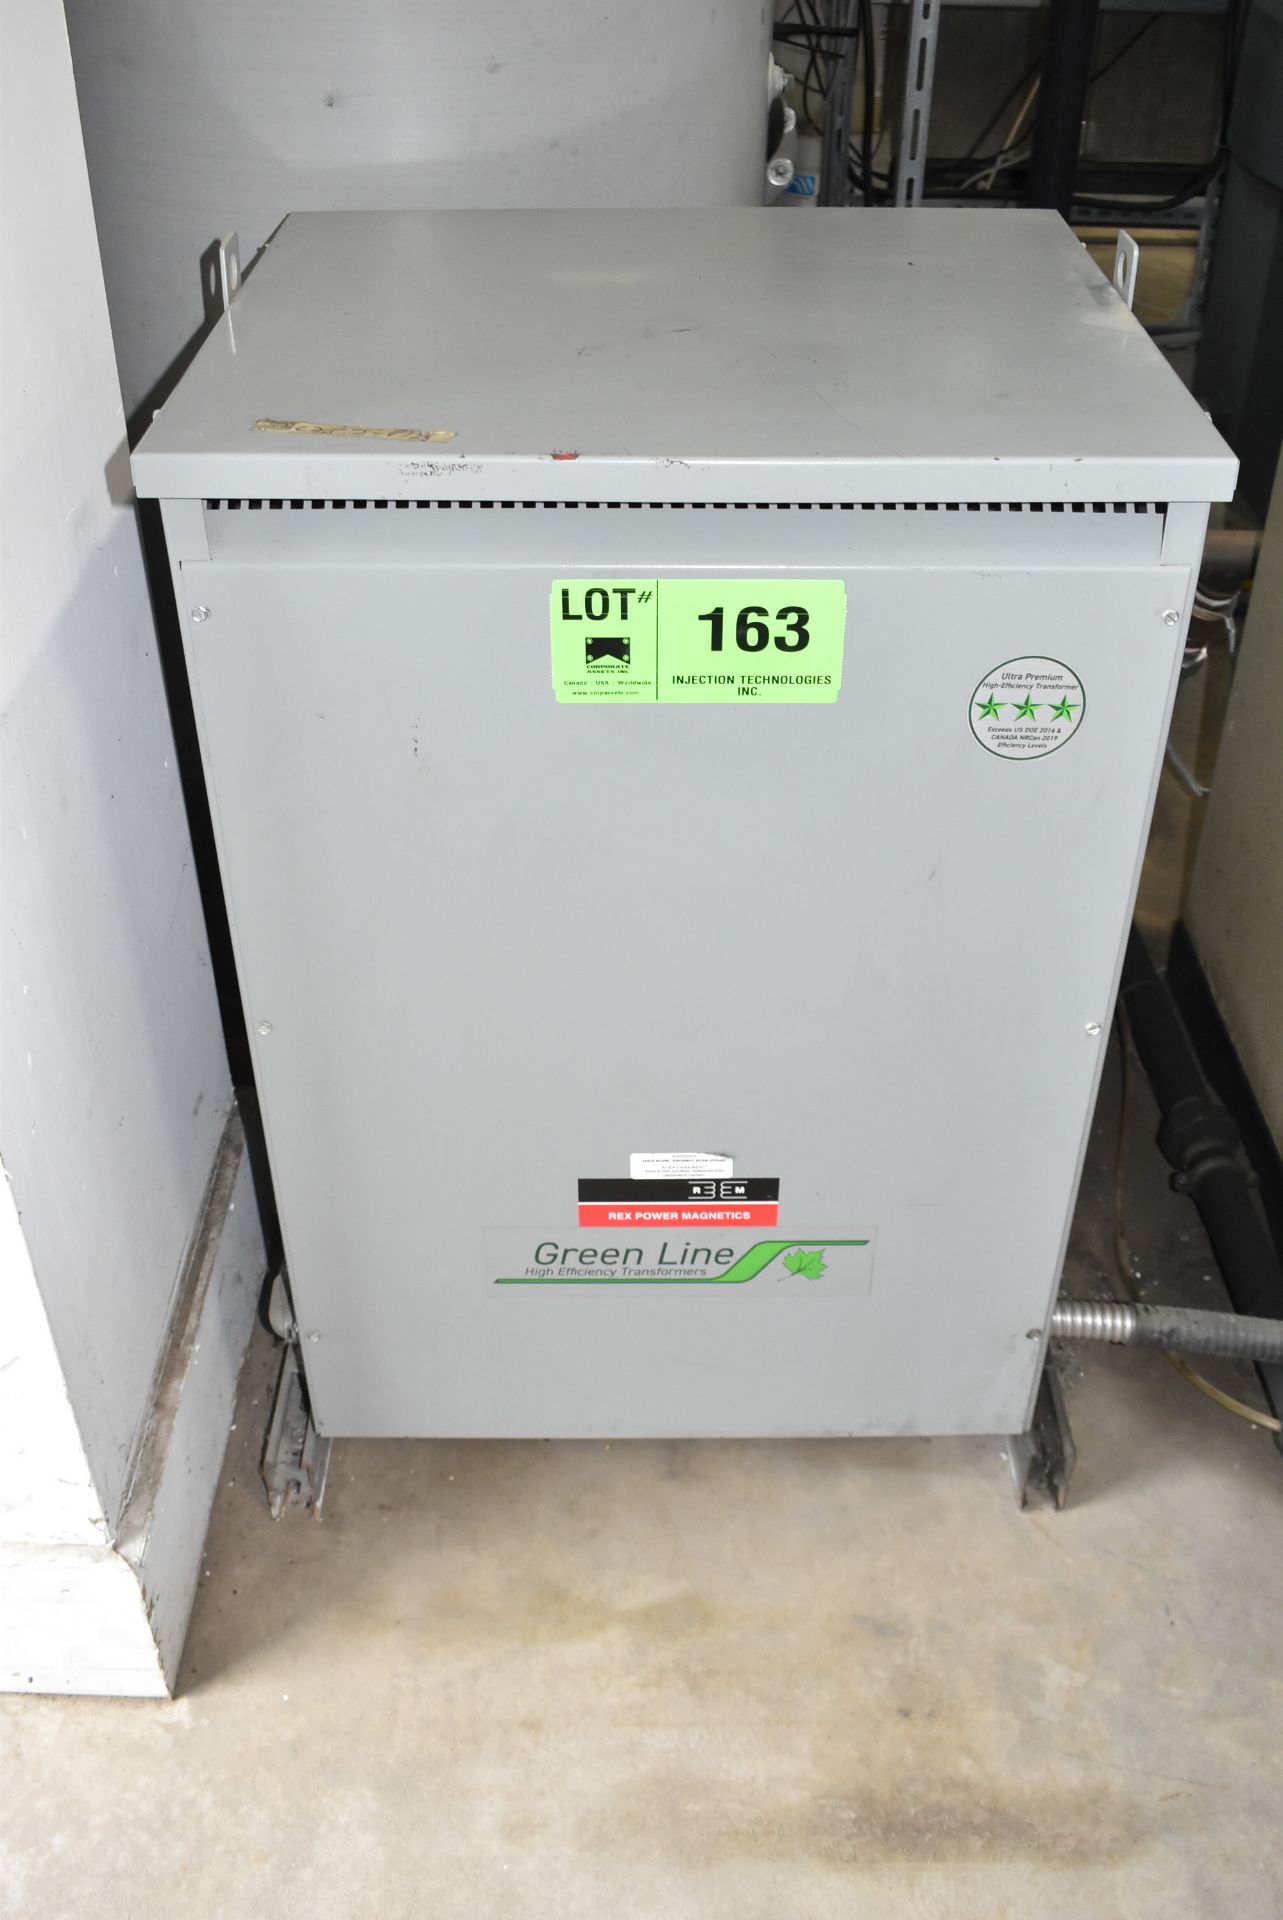 REX MANUFACTURING 75KVA TRANSFORMER (CI) [RIGGING FEES FOR LOT #163 - $125 USD PLUS APPLICABLE